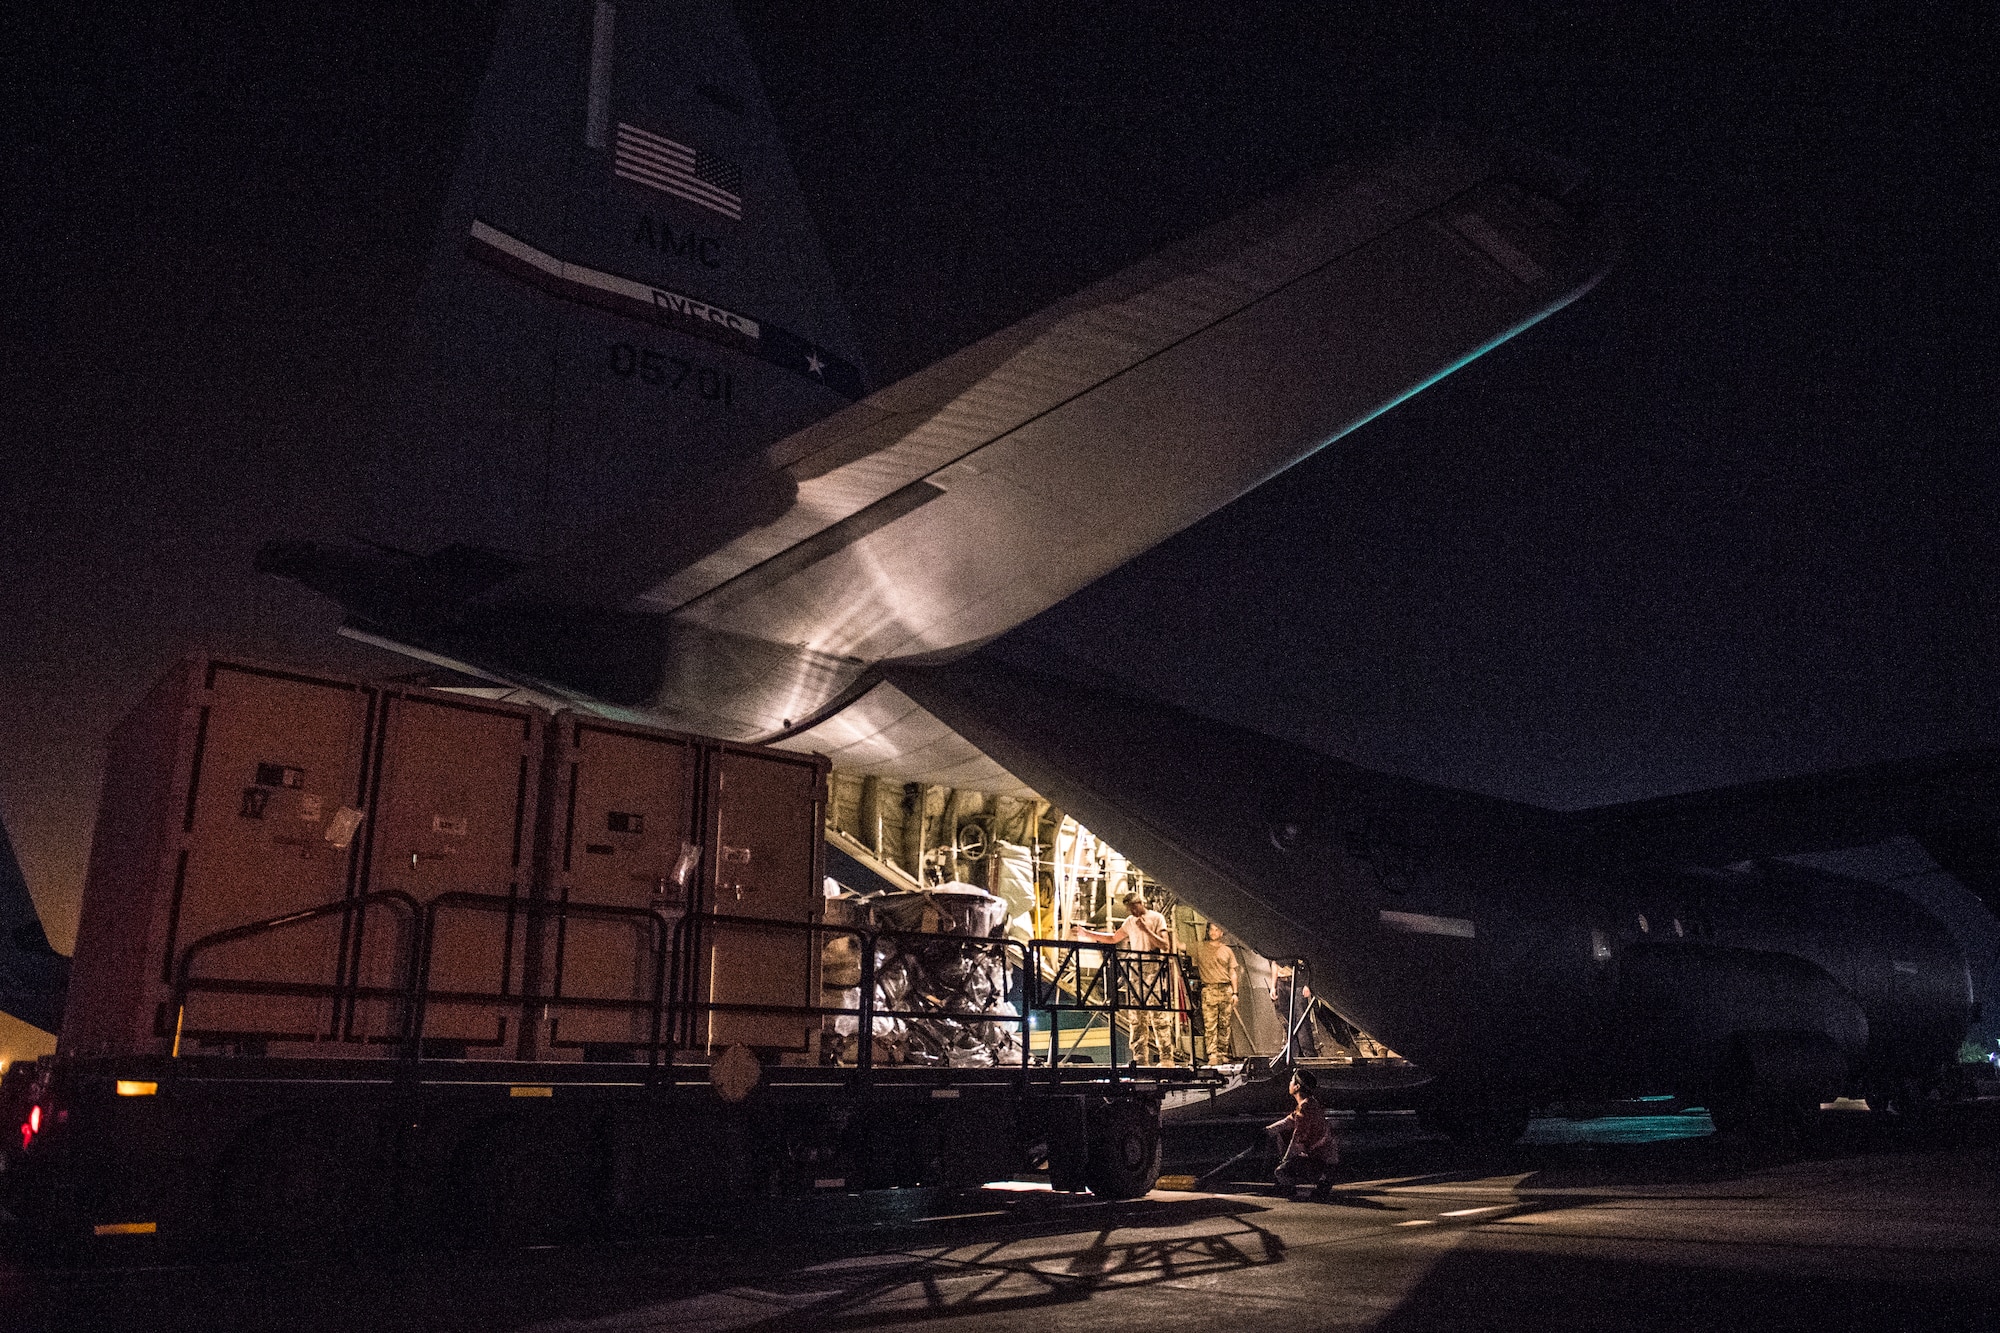 U.S. Air Force Airmen assigned to the 75th Expeditionary Airlift Squadron load two containers and luggage onto a C-130J Super Hercules at Camp Lemonnier, Djibouti, June 5, 2019. The 75th EAS provides support in medical evacuations, disaster relief, humanitarian and airdrop operations. (U.S. Air Force photo by Staff Sgt. Devin Boyer)